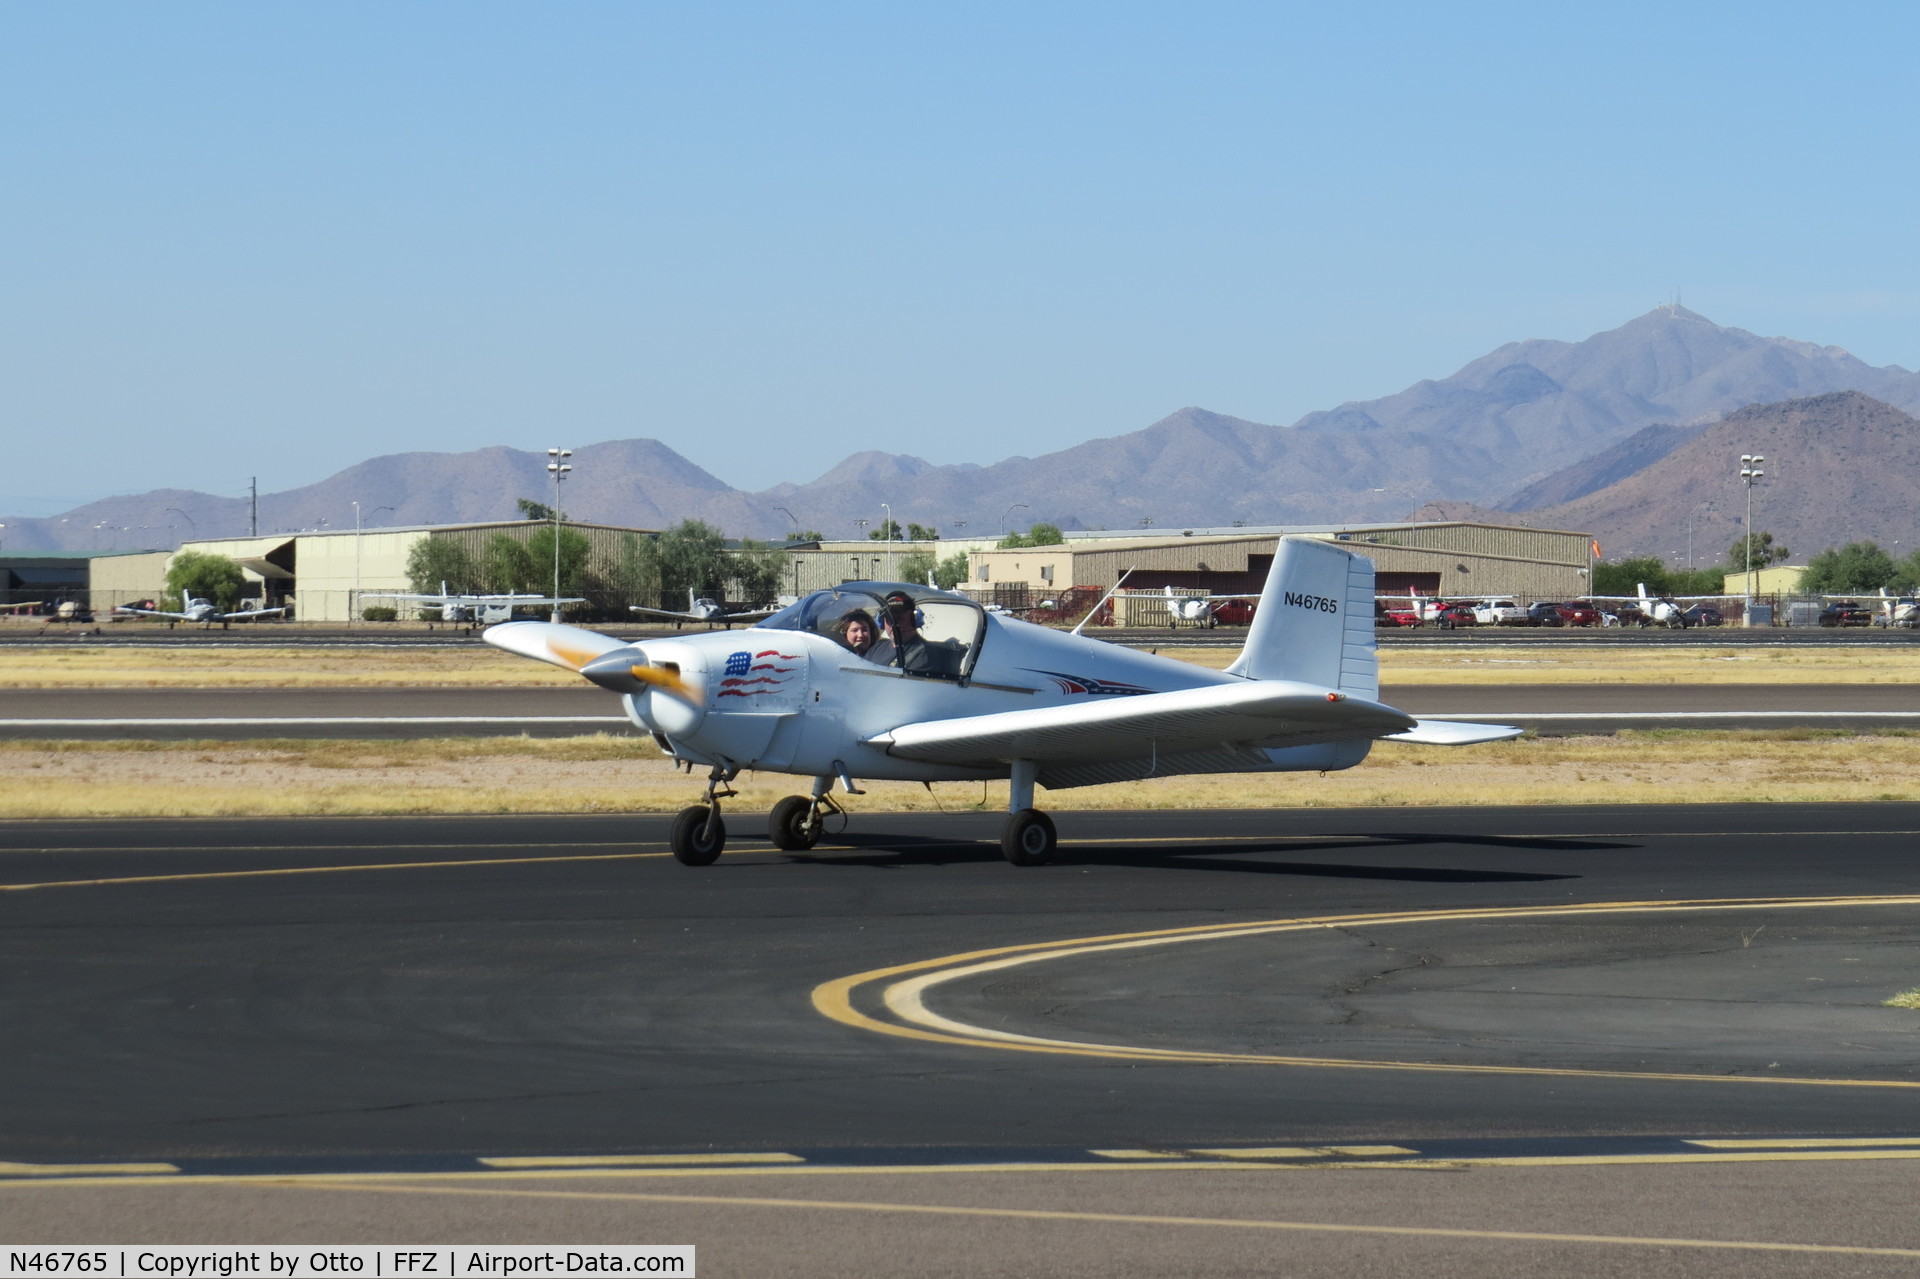 N46765, 2007 Thorp T-211 Sky Skooter C/N 21, Just landed at Copperstate